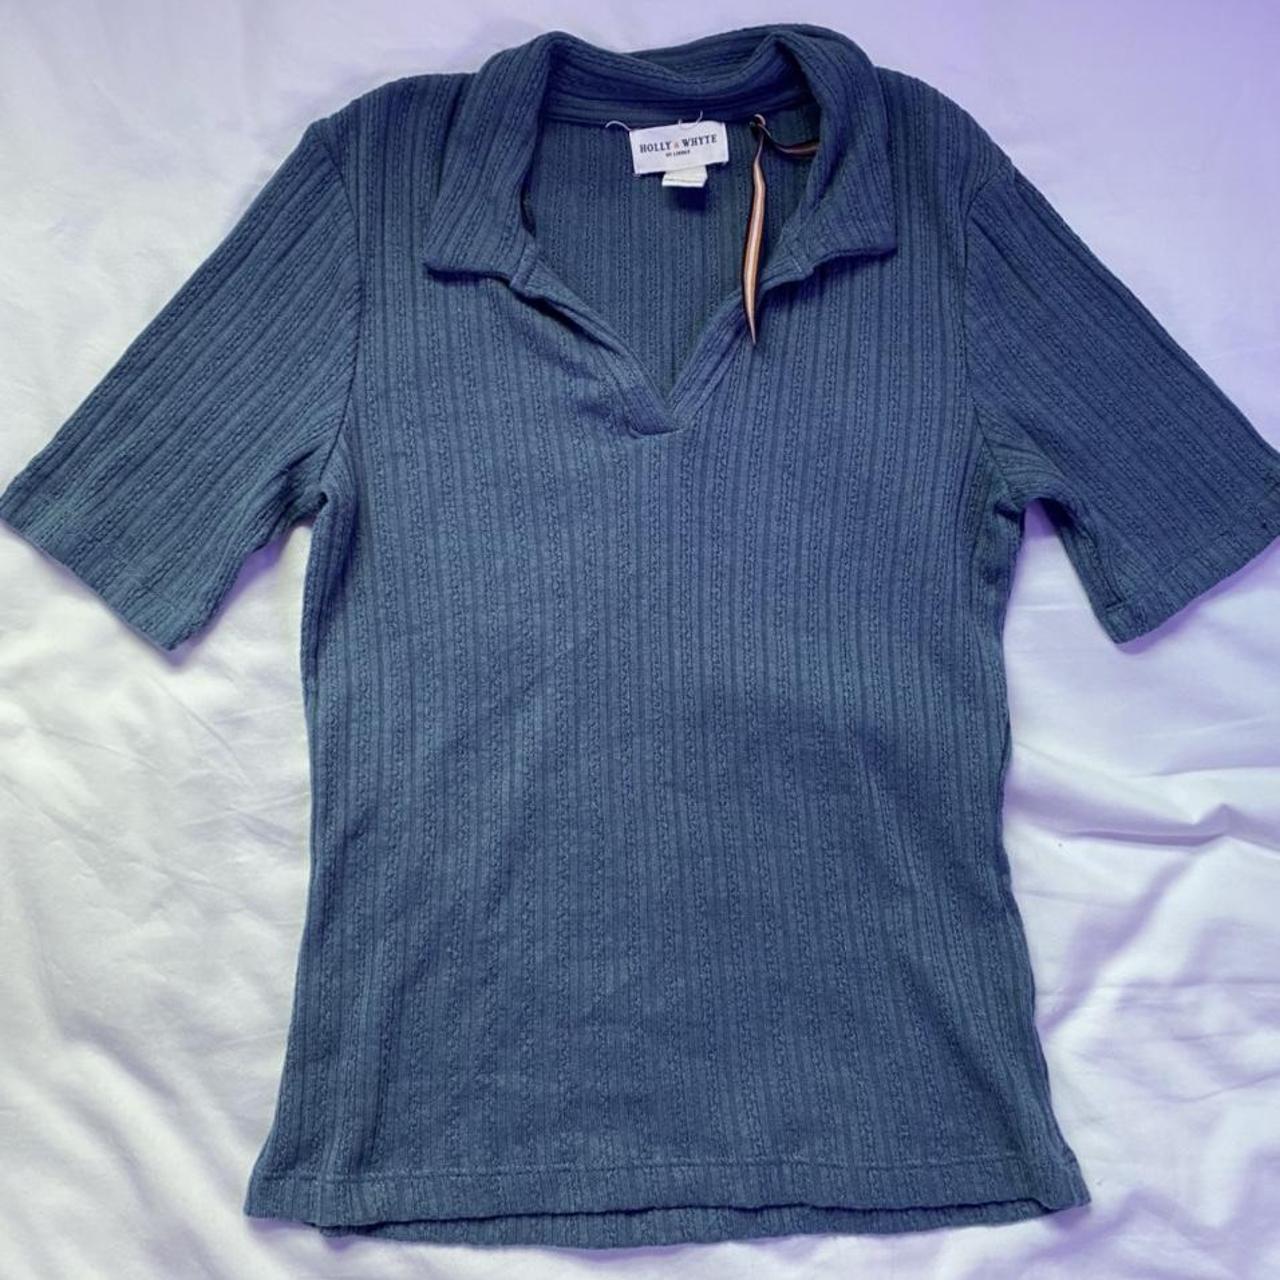 Product Image 1 - Lindex Polo Knit Tee 🧵
Bought